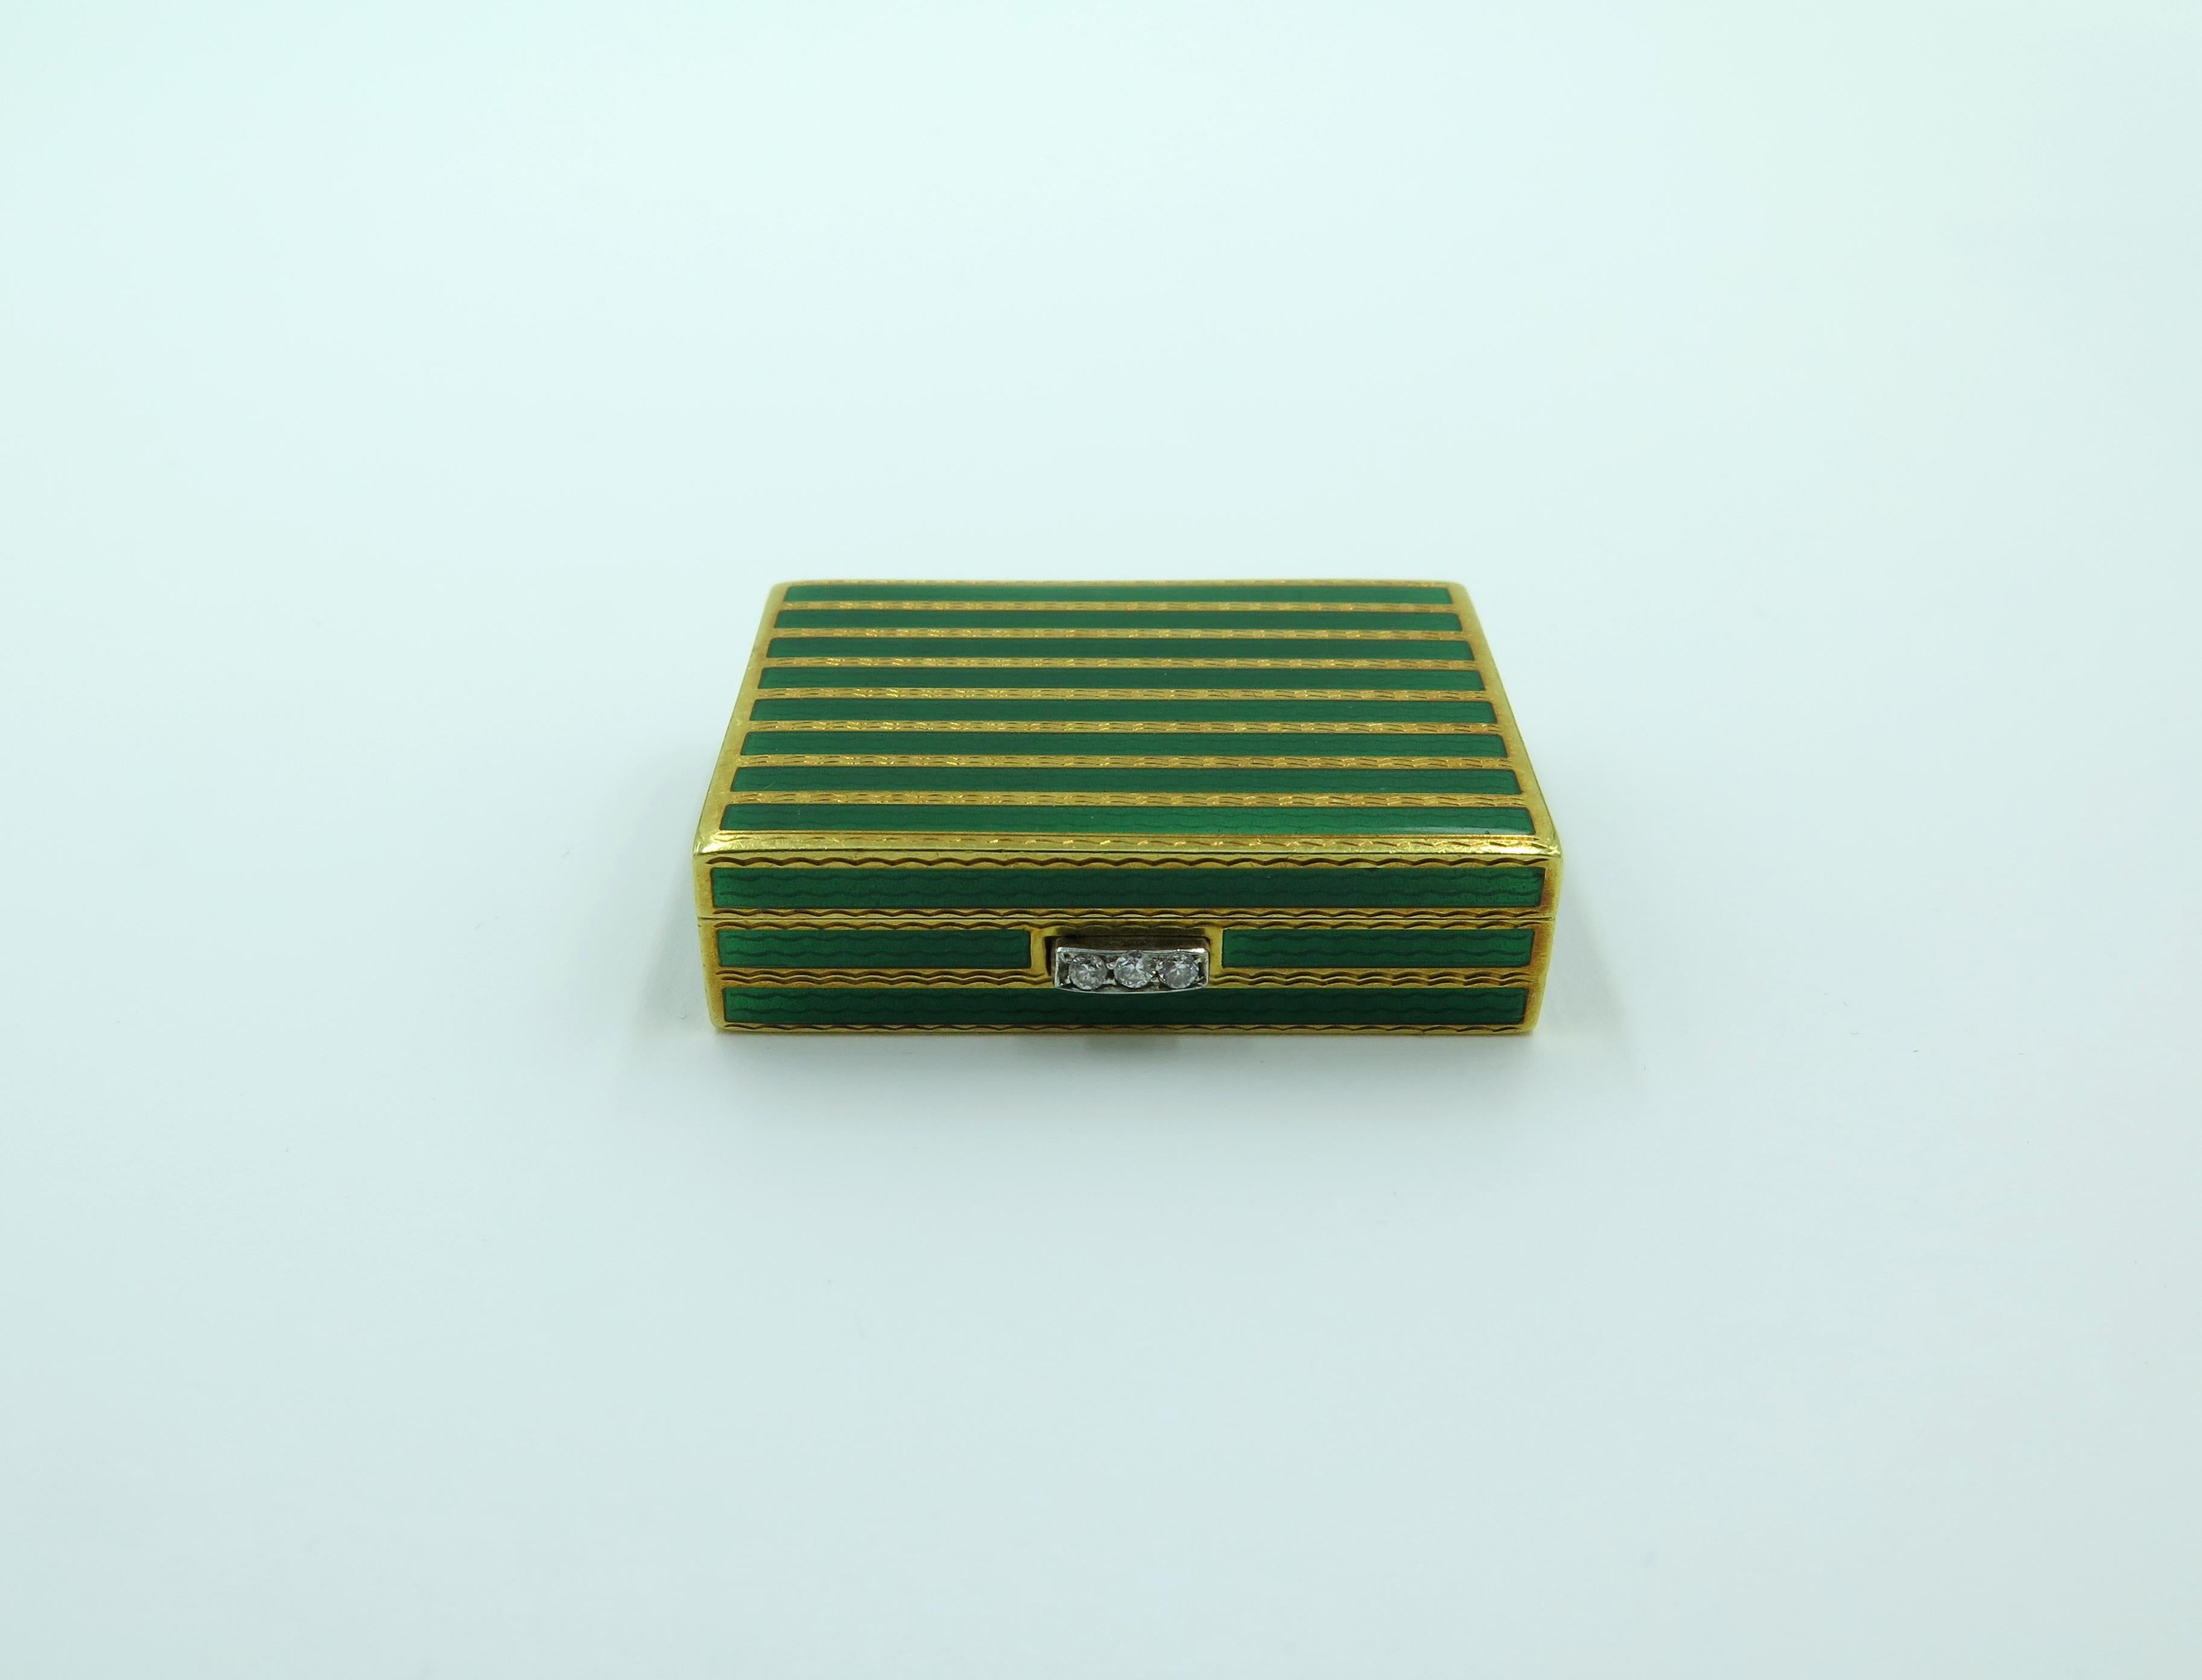 An 18 karat yellow gold, enamel and diamond box. Cartier. Circa 1960. Of rectangular outline, decorated by green guilloché  enamel stripes, enhanced by circular cut diamond push piece. The box measures approximately 1 3/8 x 1 inches, gross weight is